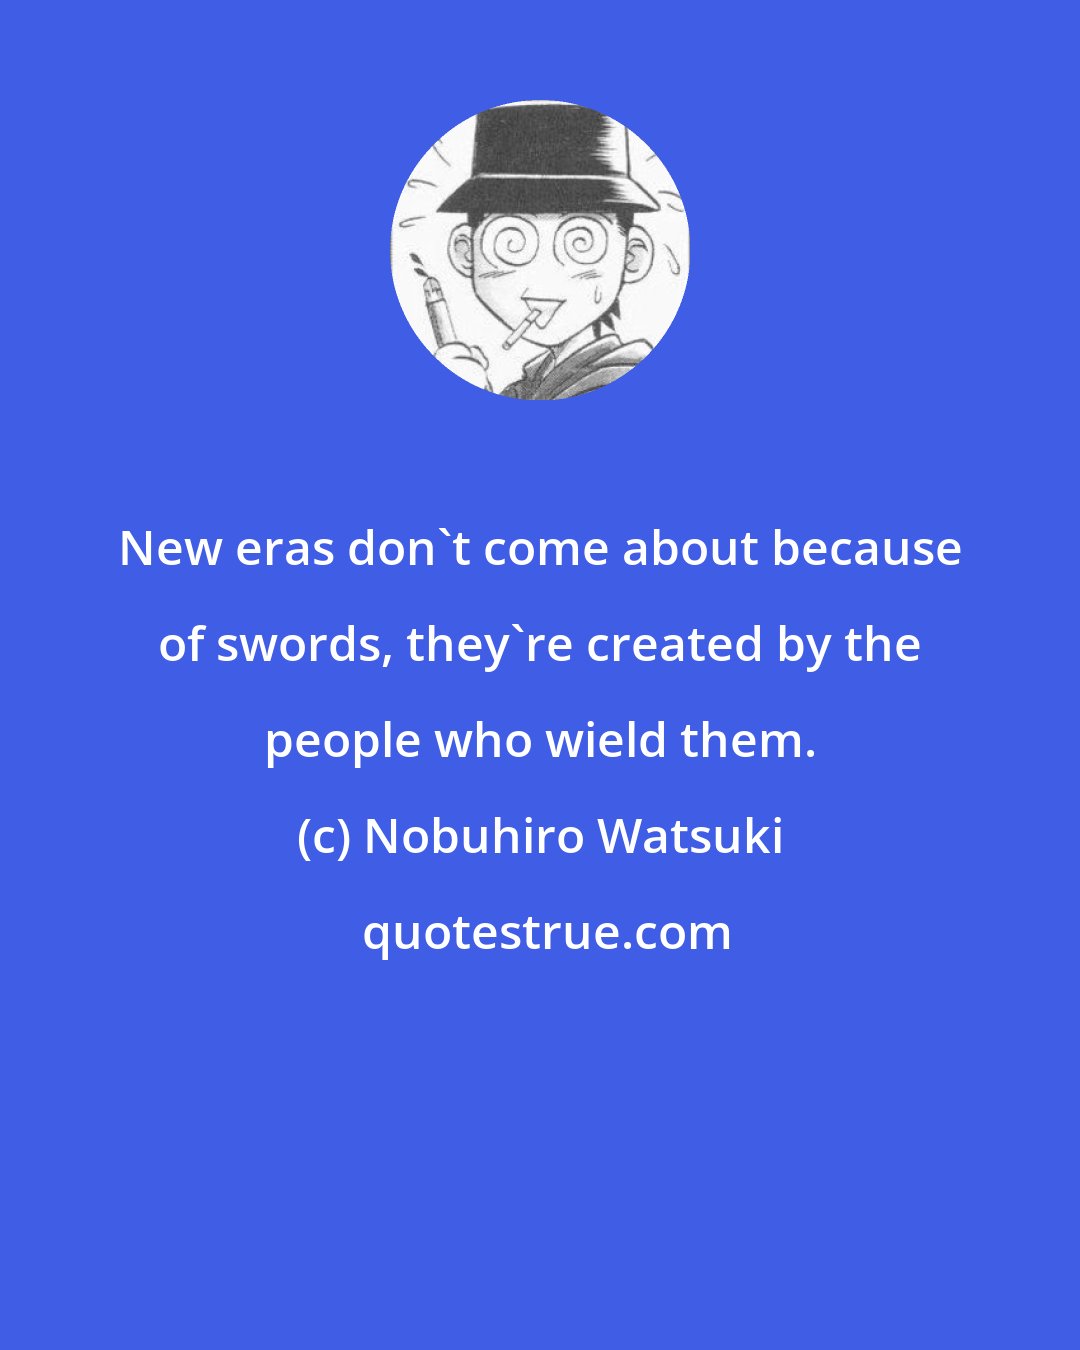 Nobuhiro Watsuki: New eras don't come about because of swords, they're created by the people who wield them.